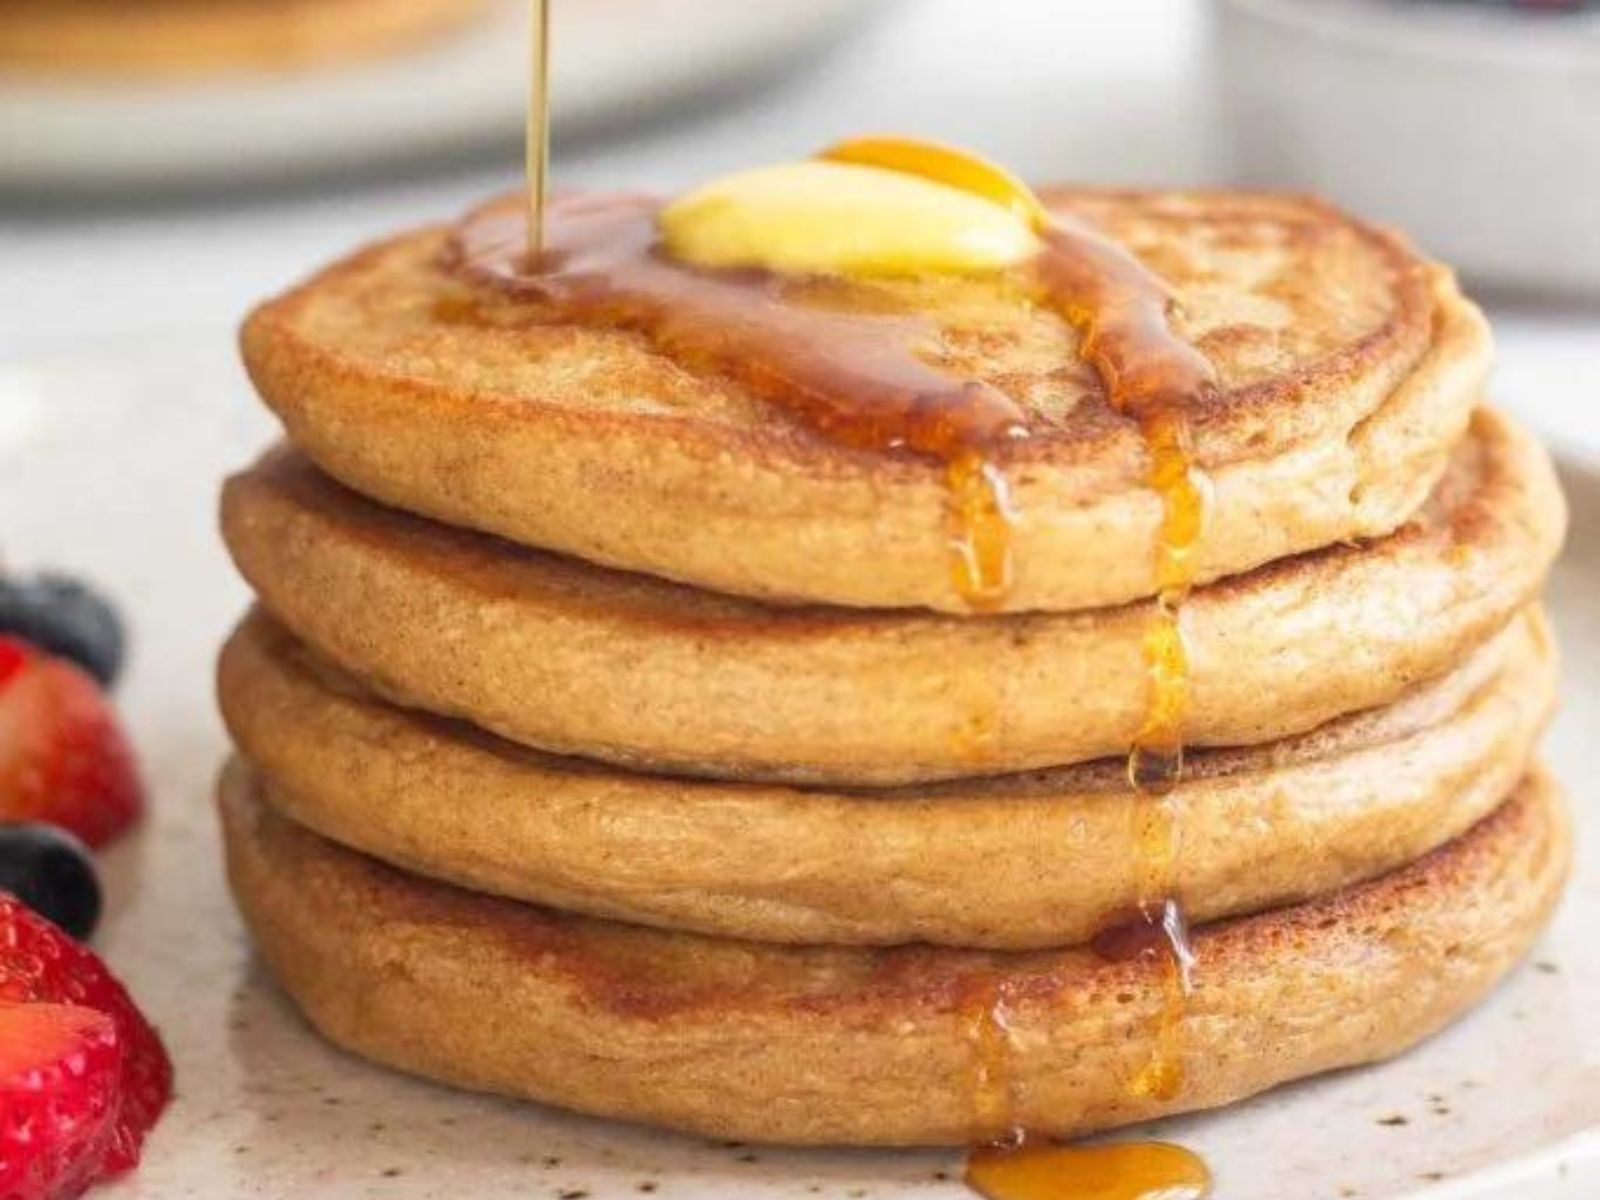 Cottage Cheese Recipes, Pancakes, Courtesy of Eat the Gains